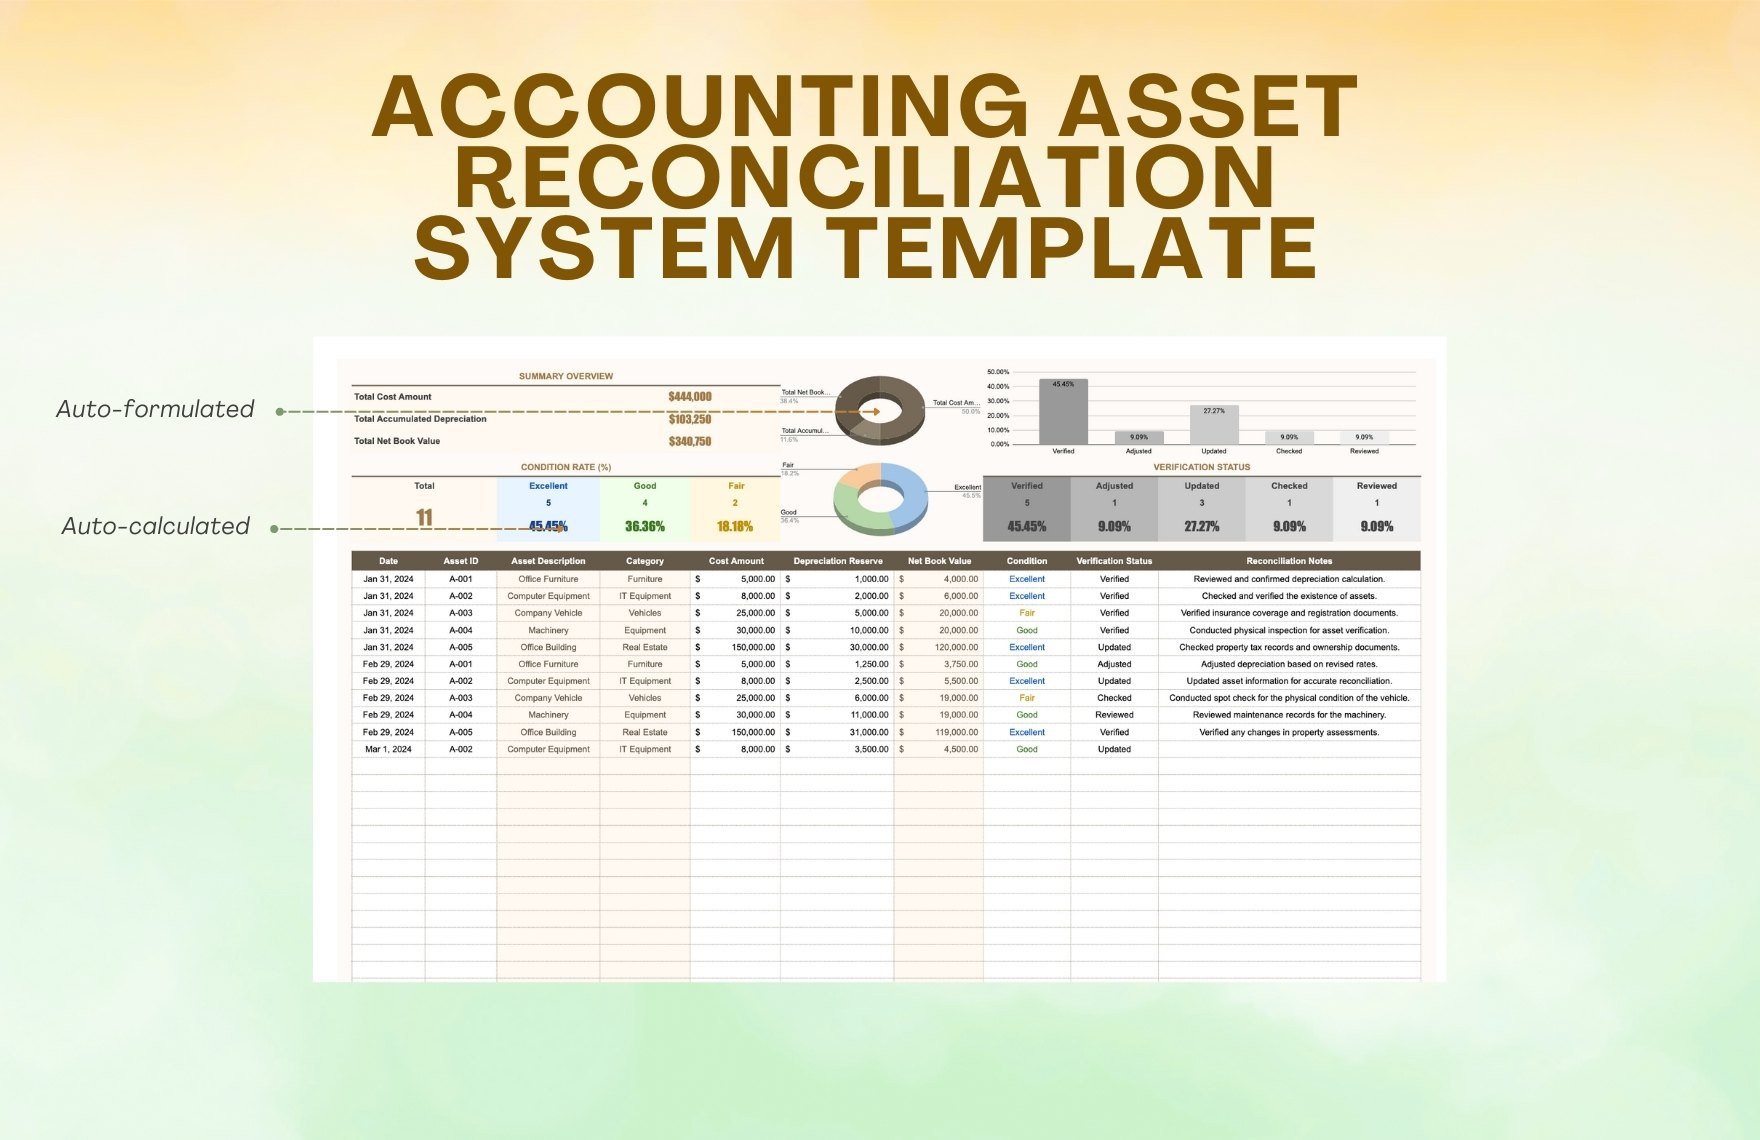 Accounting Asset Reconciliation System Template